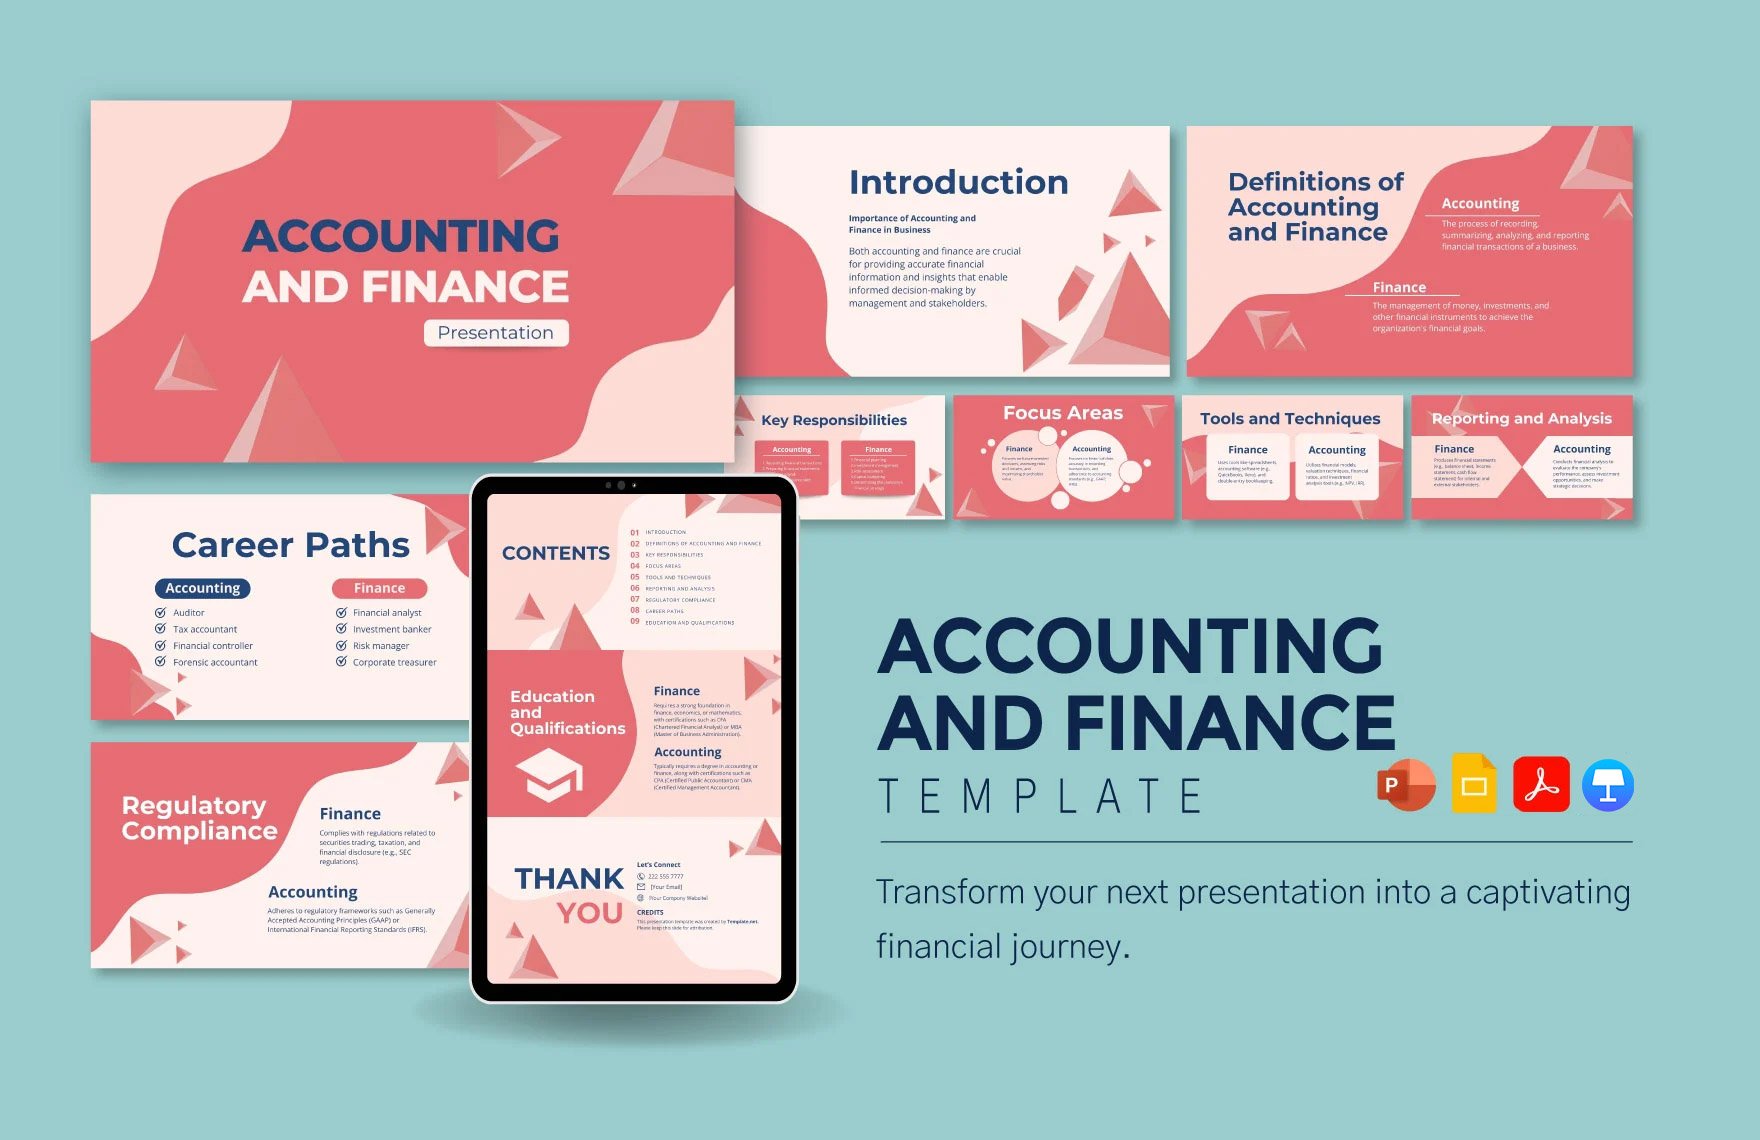 Accounting and Finance Template